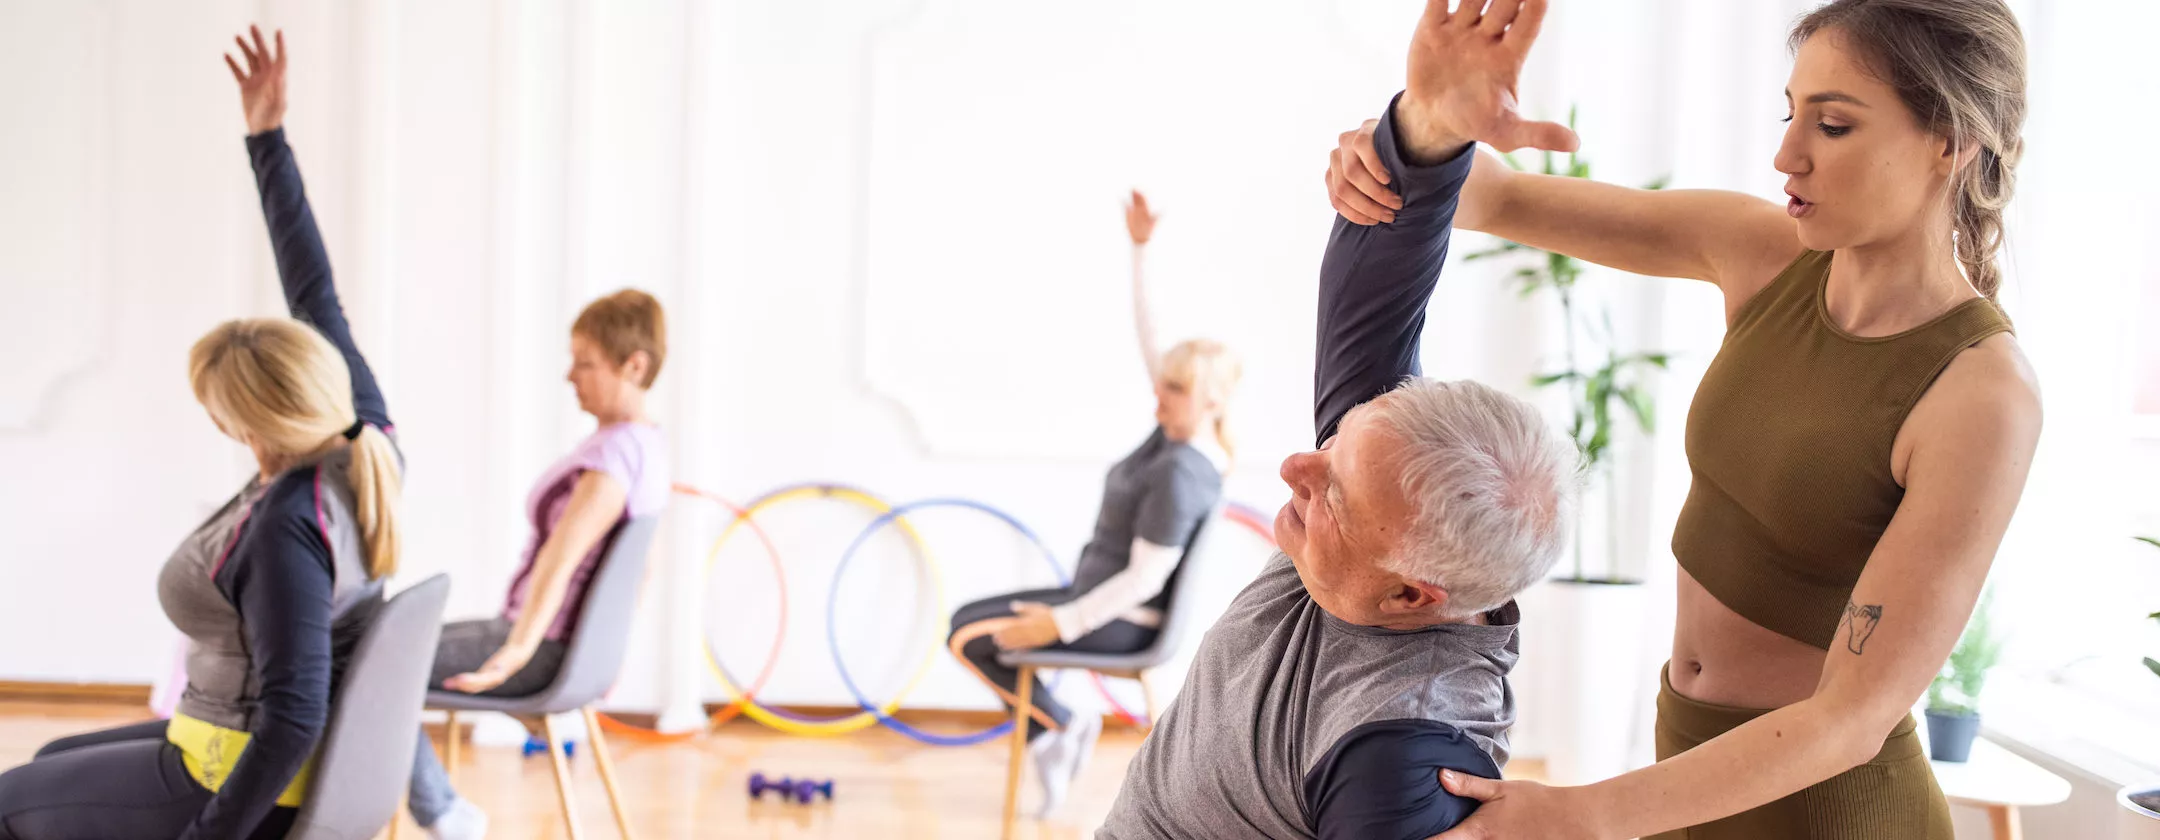 Yoga instructor assisting senior man during yoga class on chairs